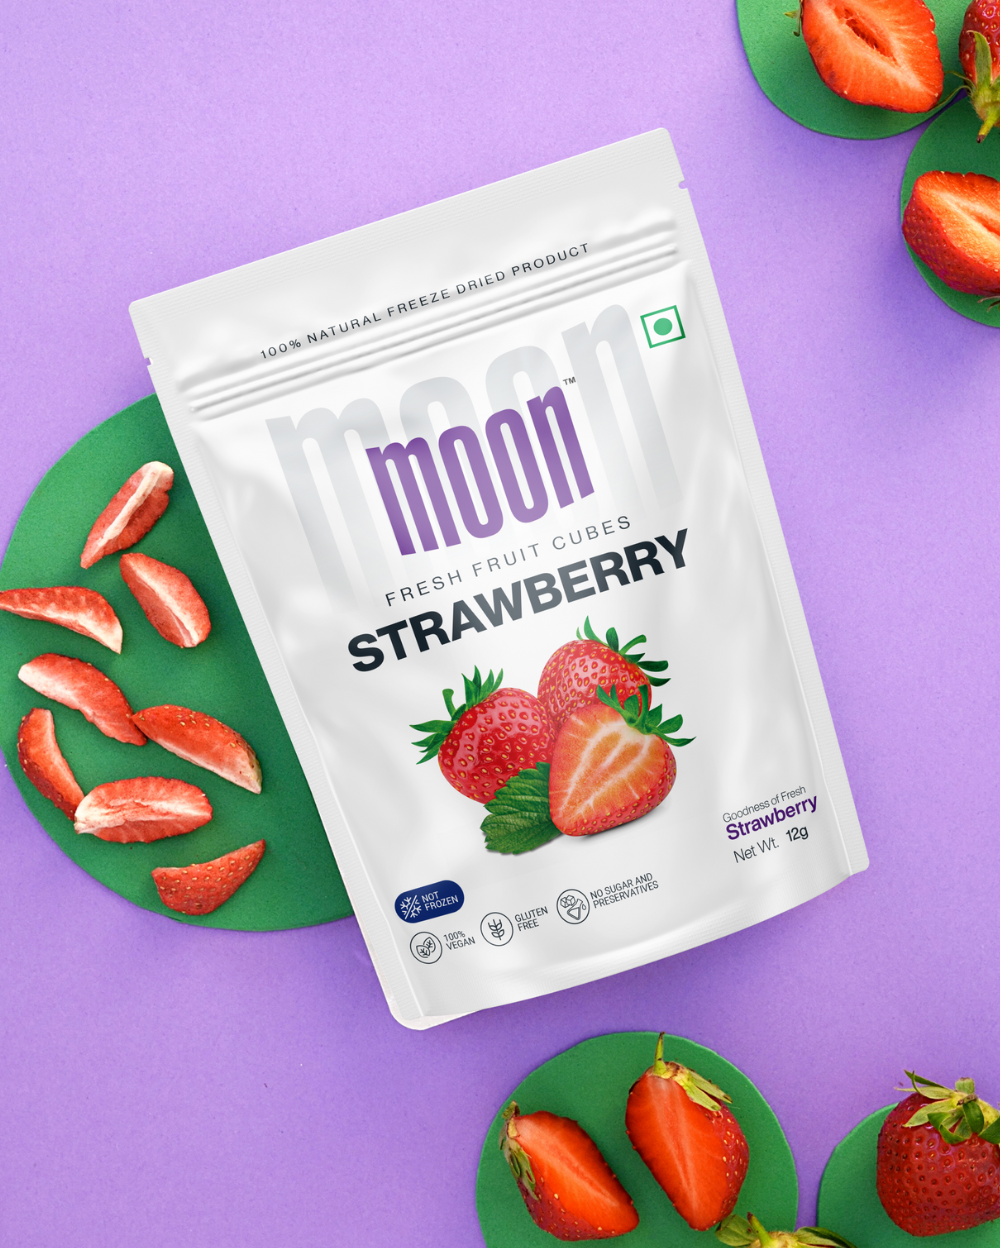 A package of nutritious snack Moon Freeze Dried Mango Cube + Strawberry on a purple background, surrounded by fresh strawberries and green coasters.